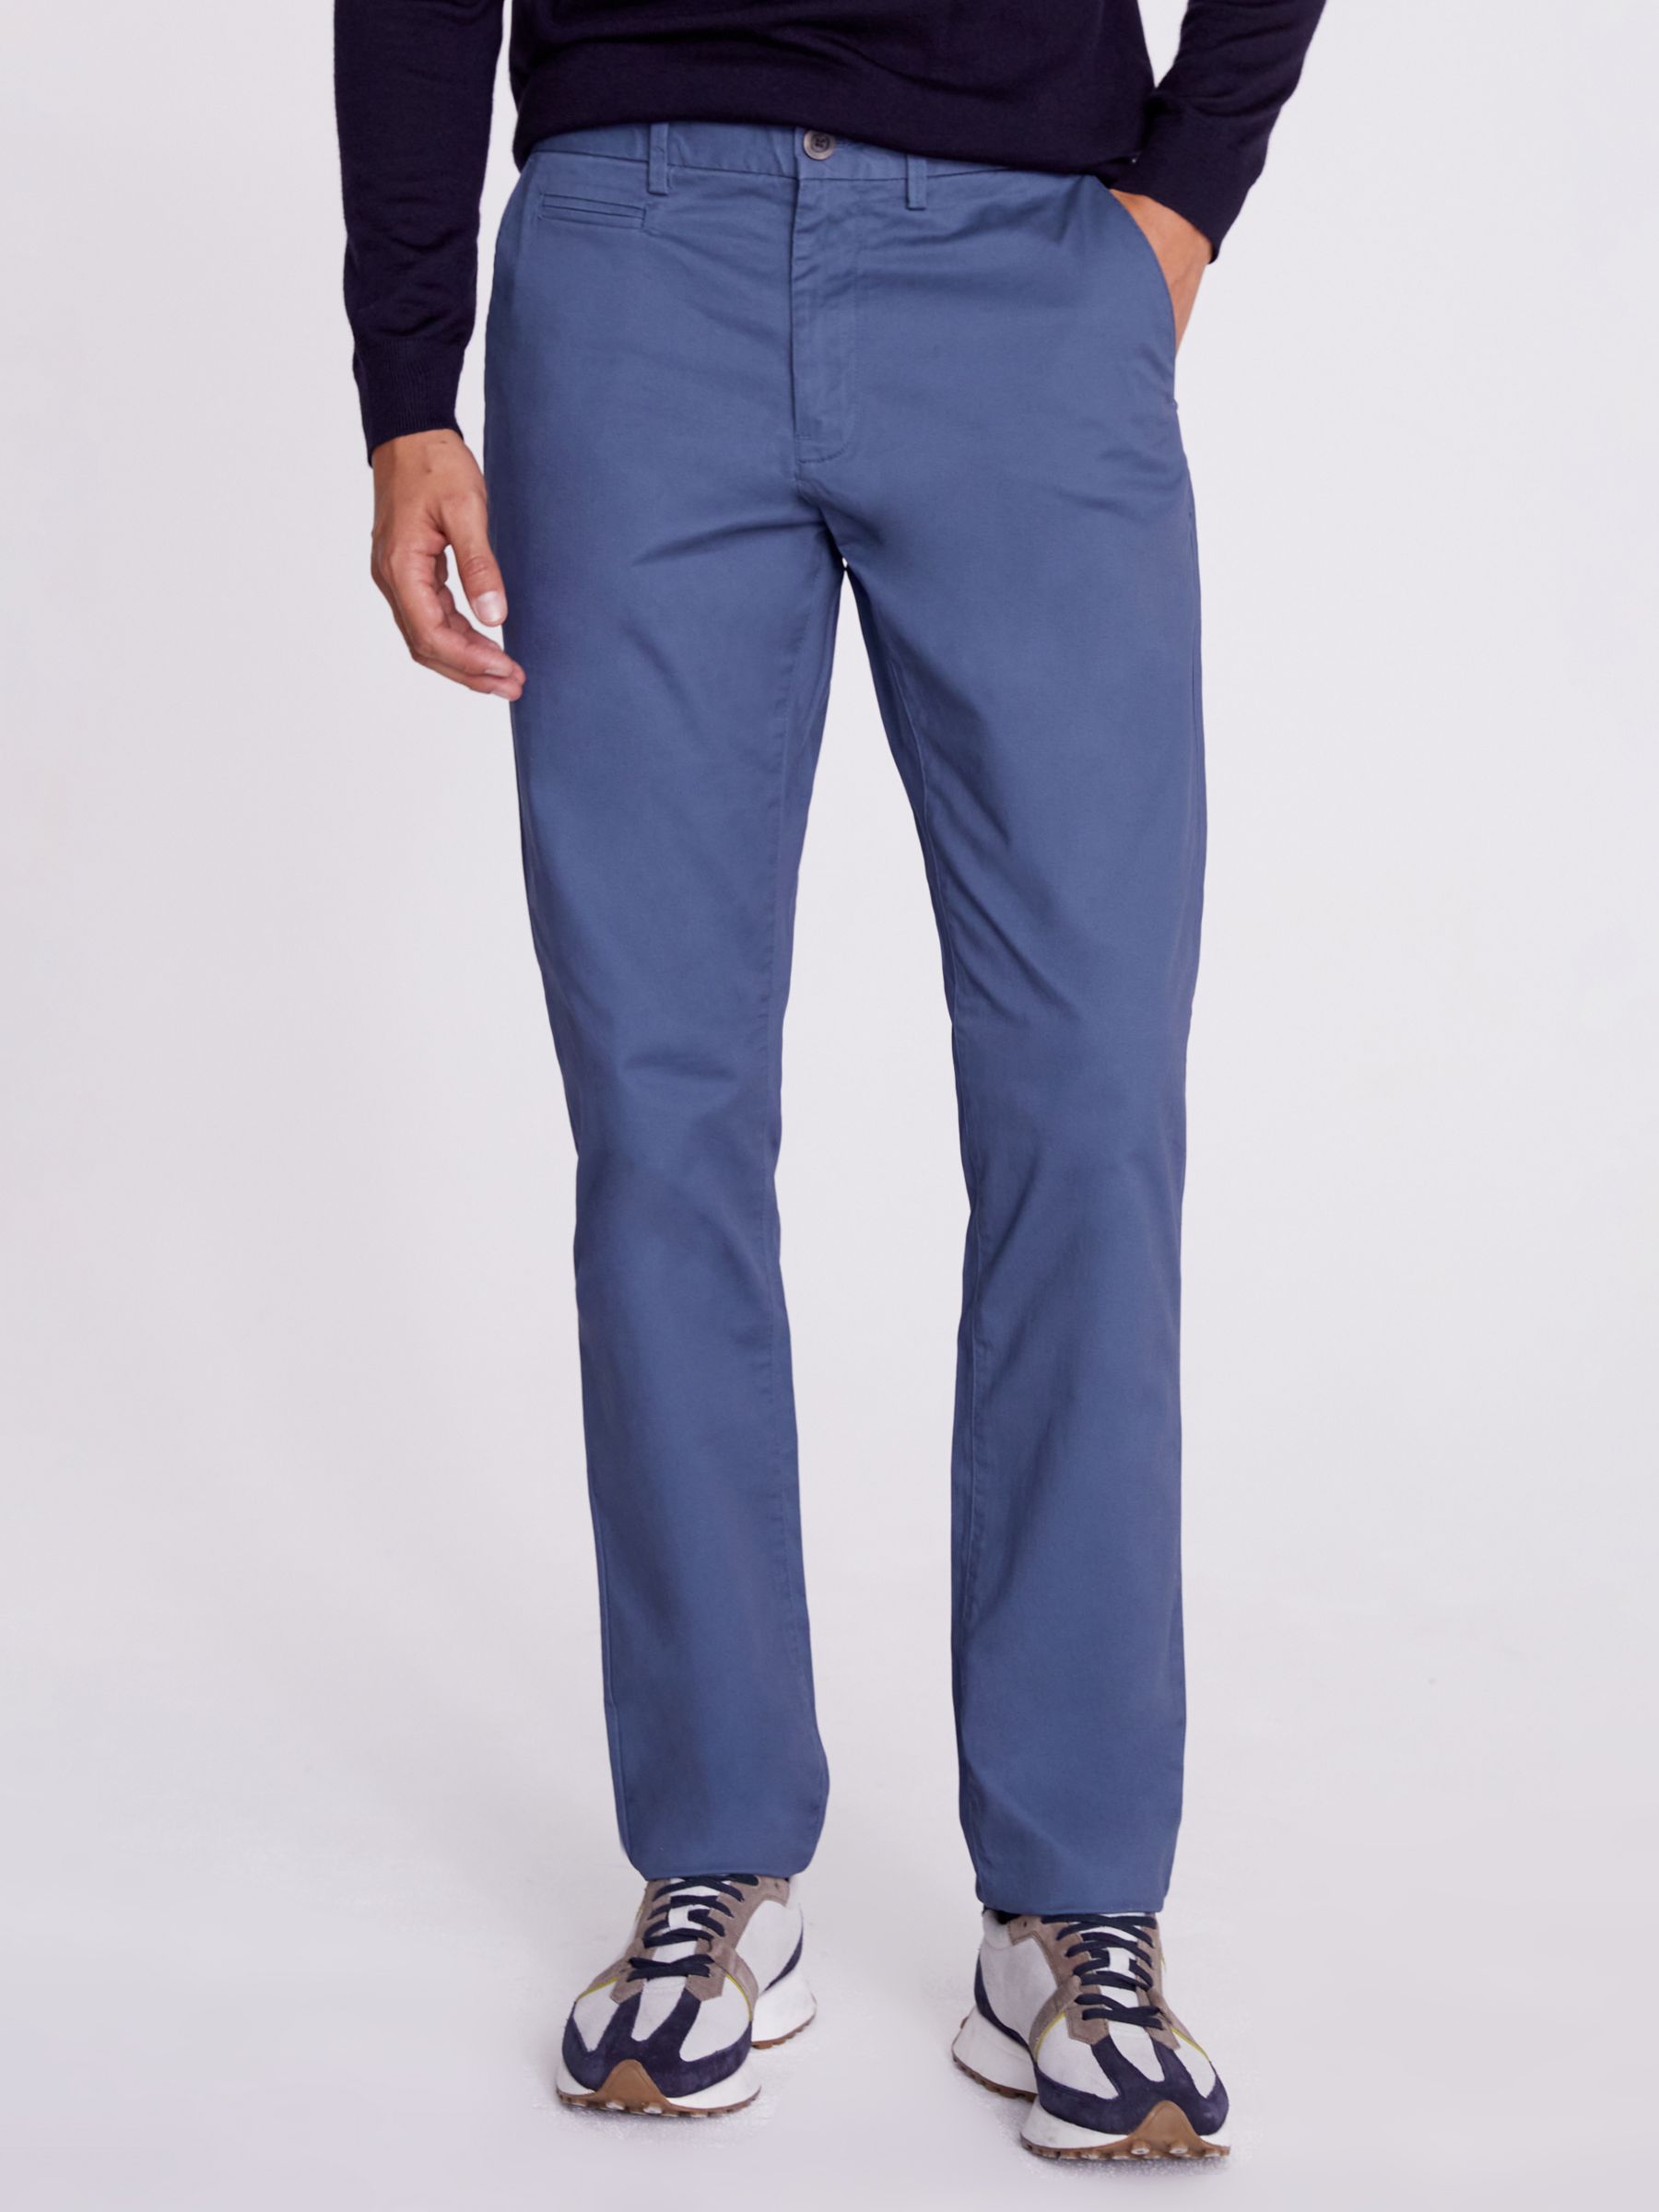 Moss Tailored Stretch Chinos, Blue at John Lewis & Partners